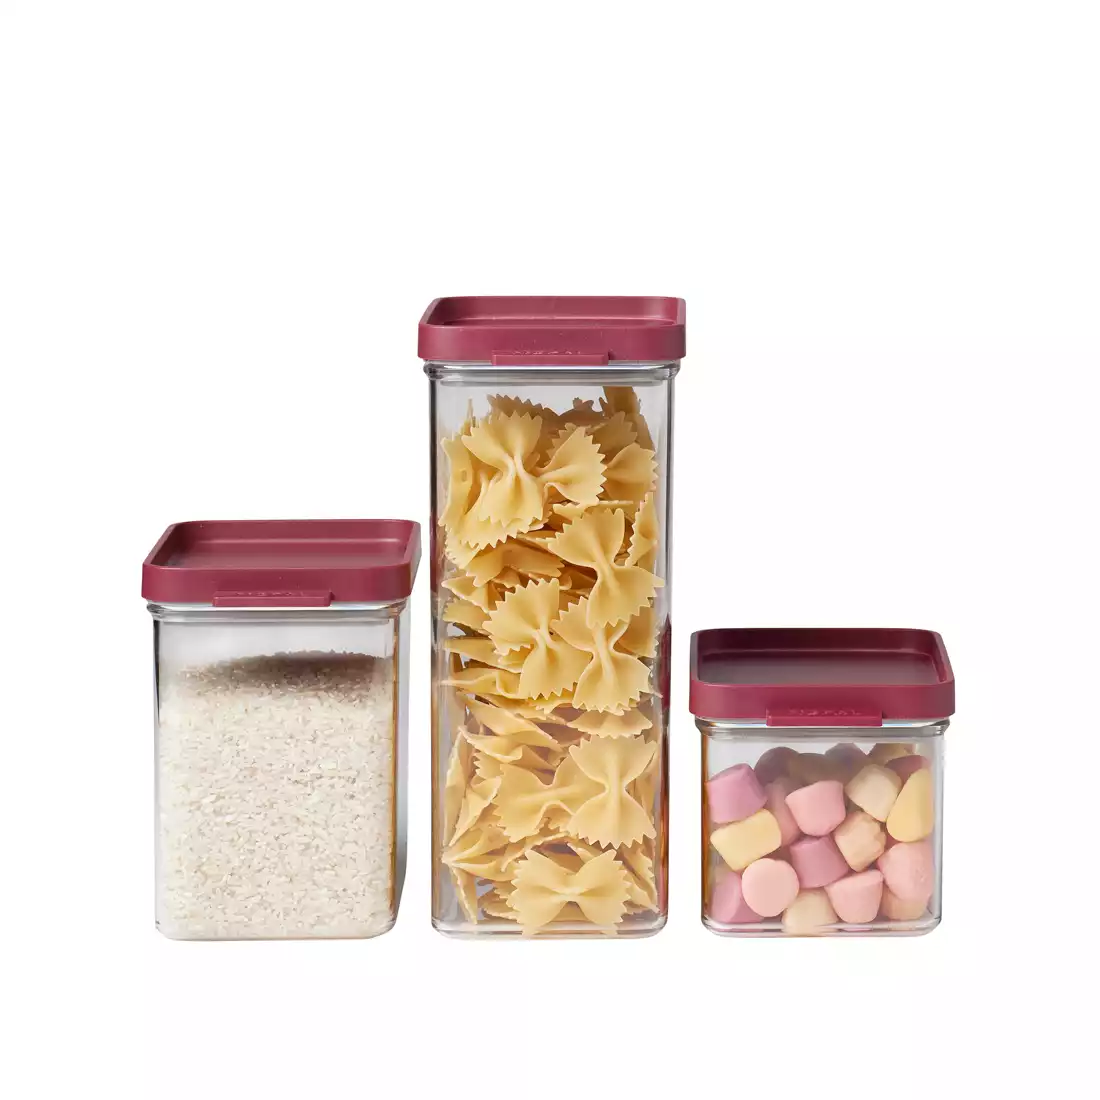 MEPAL OMNIA set of 3 food containers, nordic berry